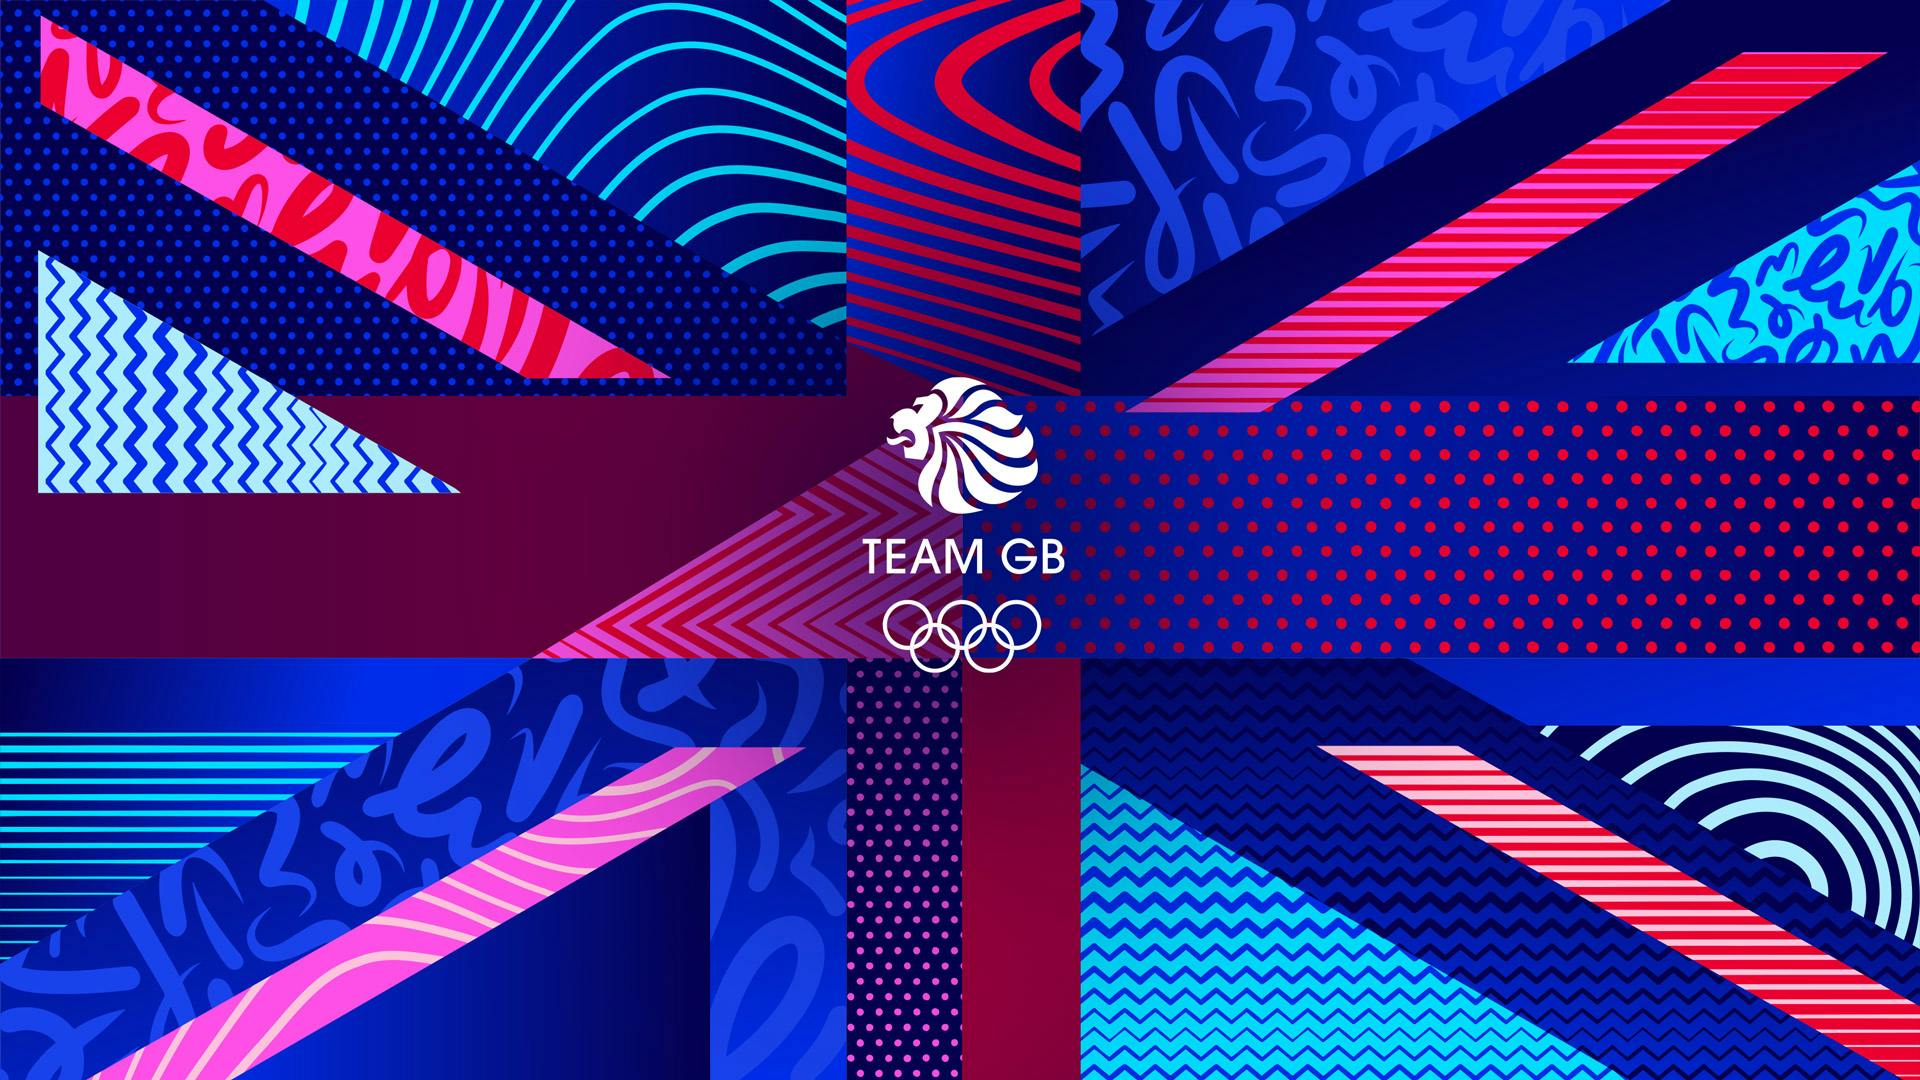 Graphic showing the Team GB branding ahead of Paris 2024, featuring a Union Jack design in contrasting patterns and different shades of blues, pinks and whites, with the Team GB lion badge and Olympic rings at the centre